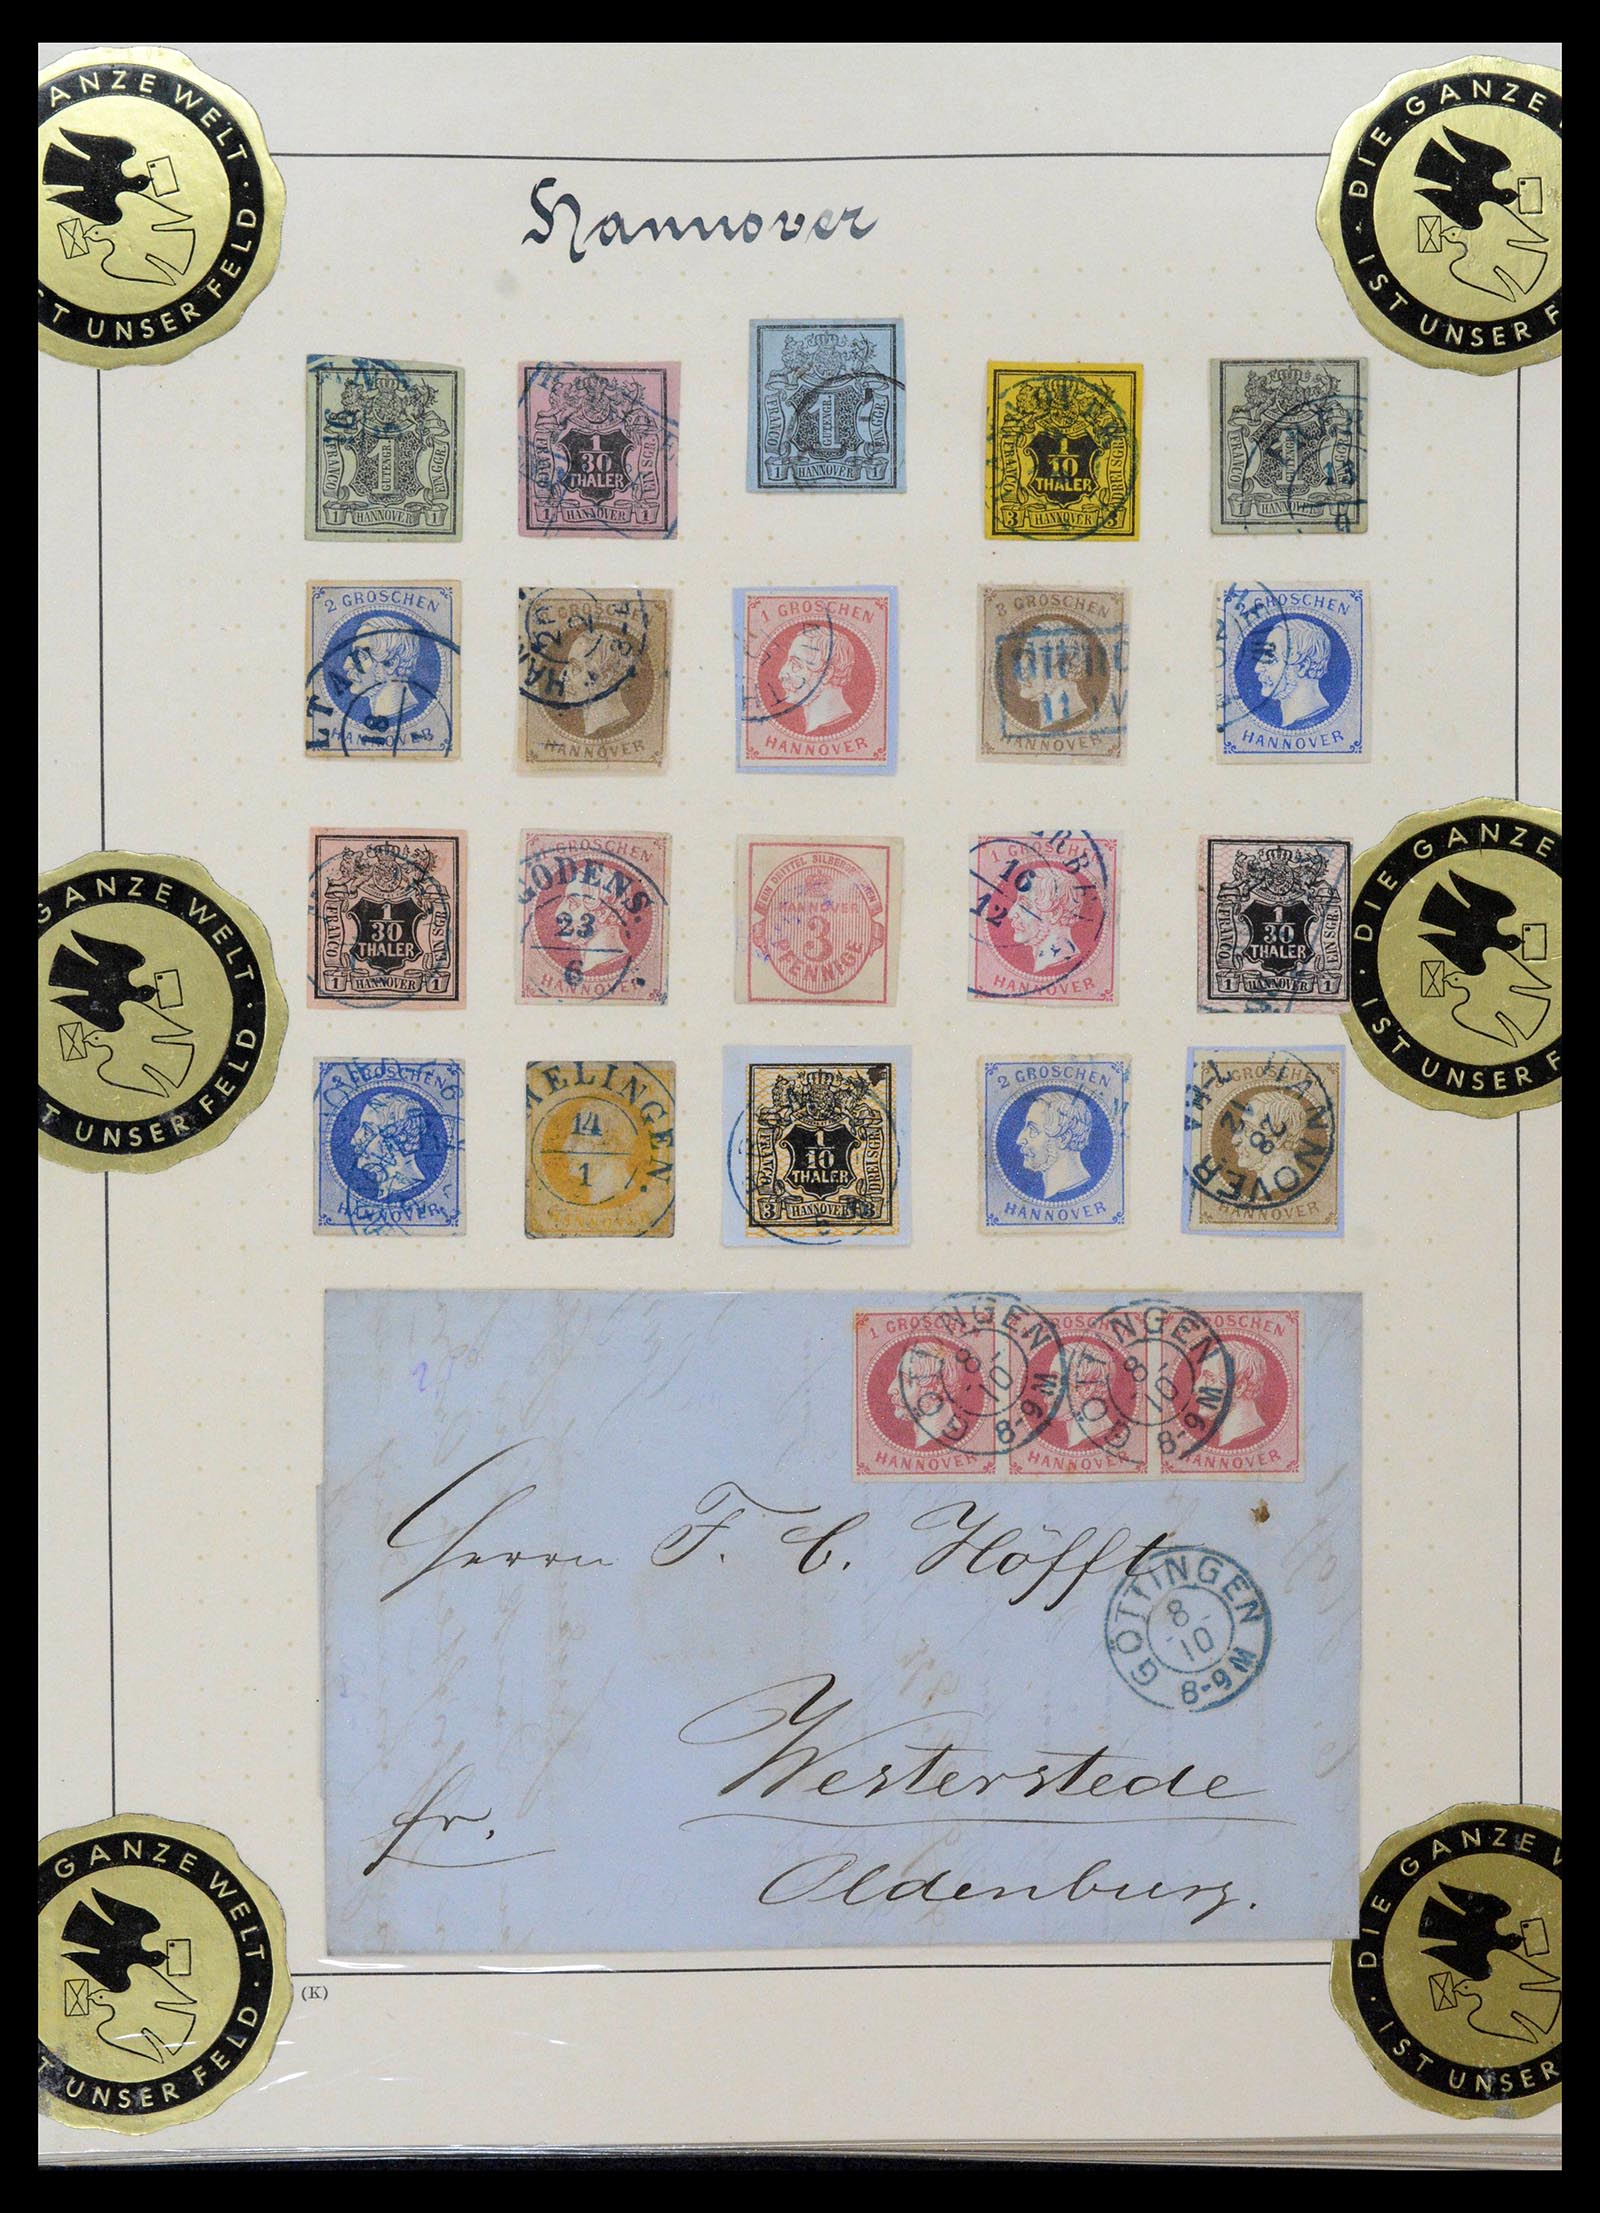 39200 0019 - Stamp collection 39200 Hannover SUPER collection 1850-1864.